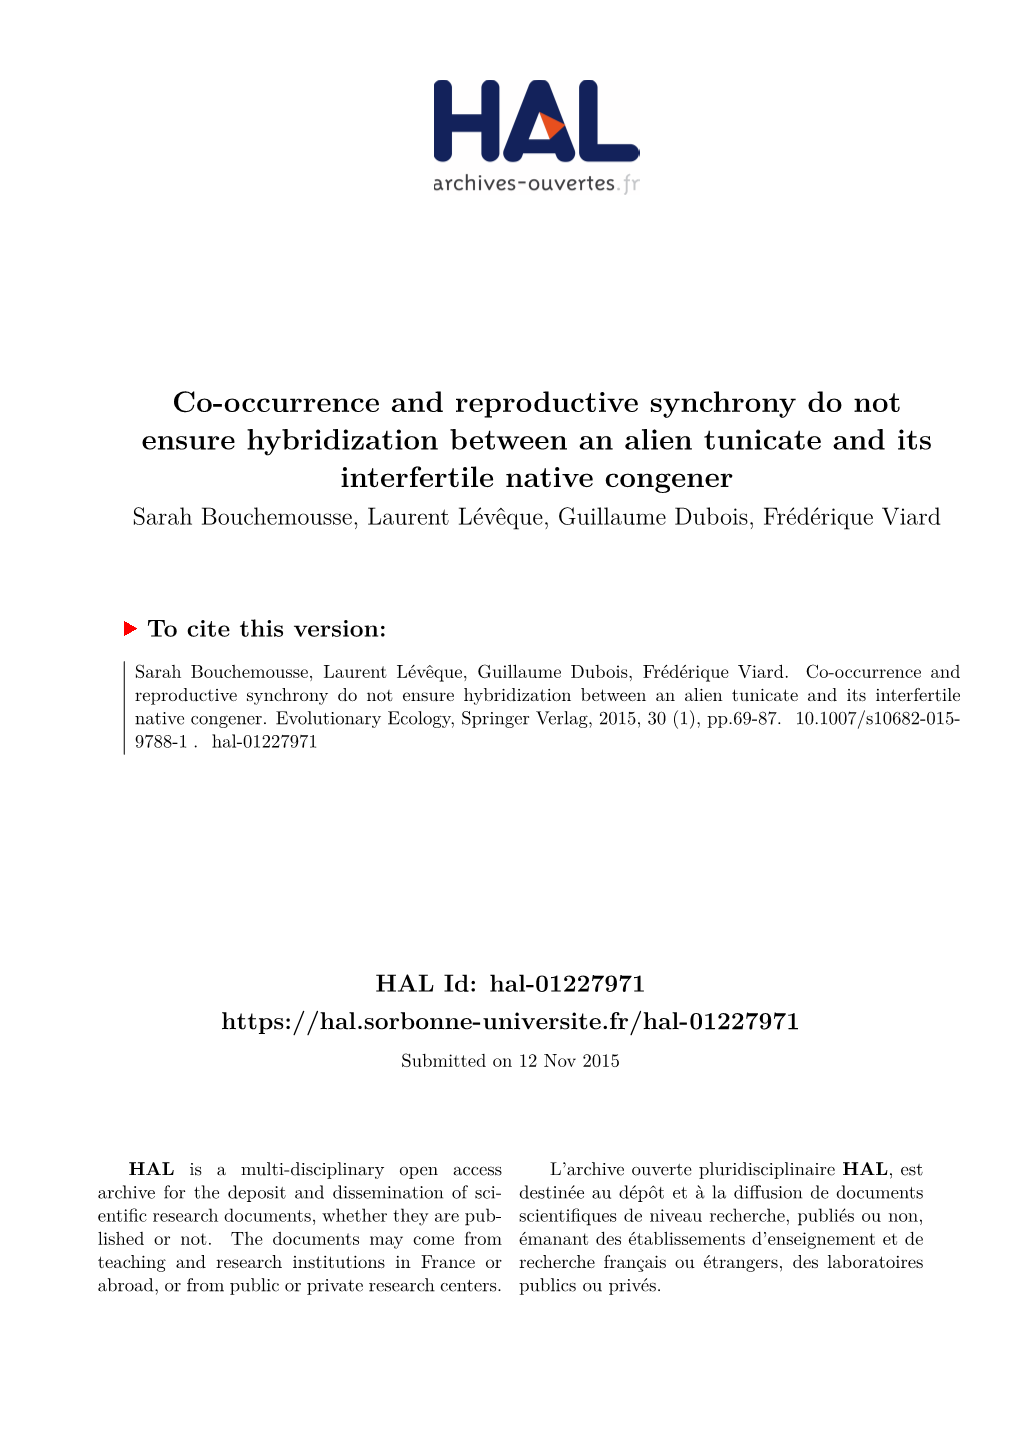 Co-Occurrence and Reproductive Synchrony Do Not Ensure Hybridization Between an Alien Tunicate and Its Interfertile Native Conge